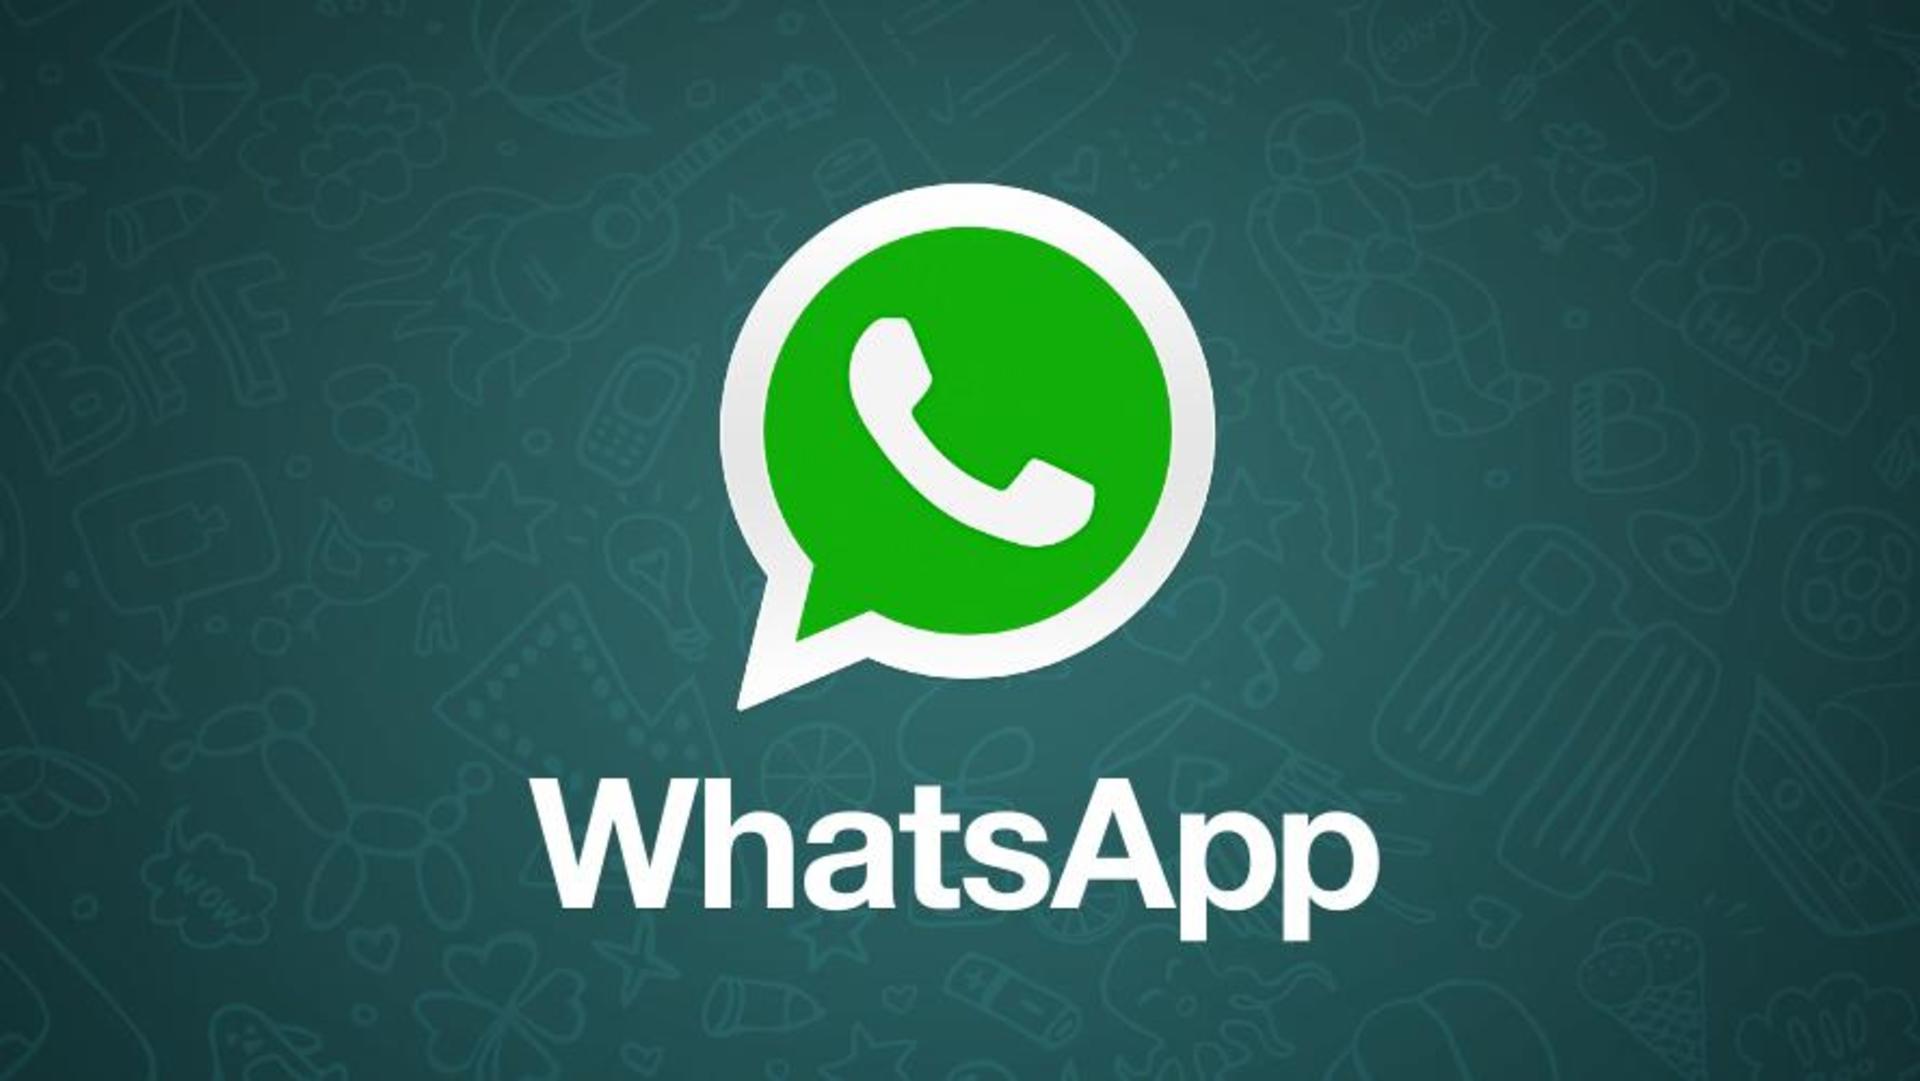 WhatsApp developing 'mute' shortcut for group chats on desktops